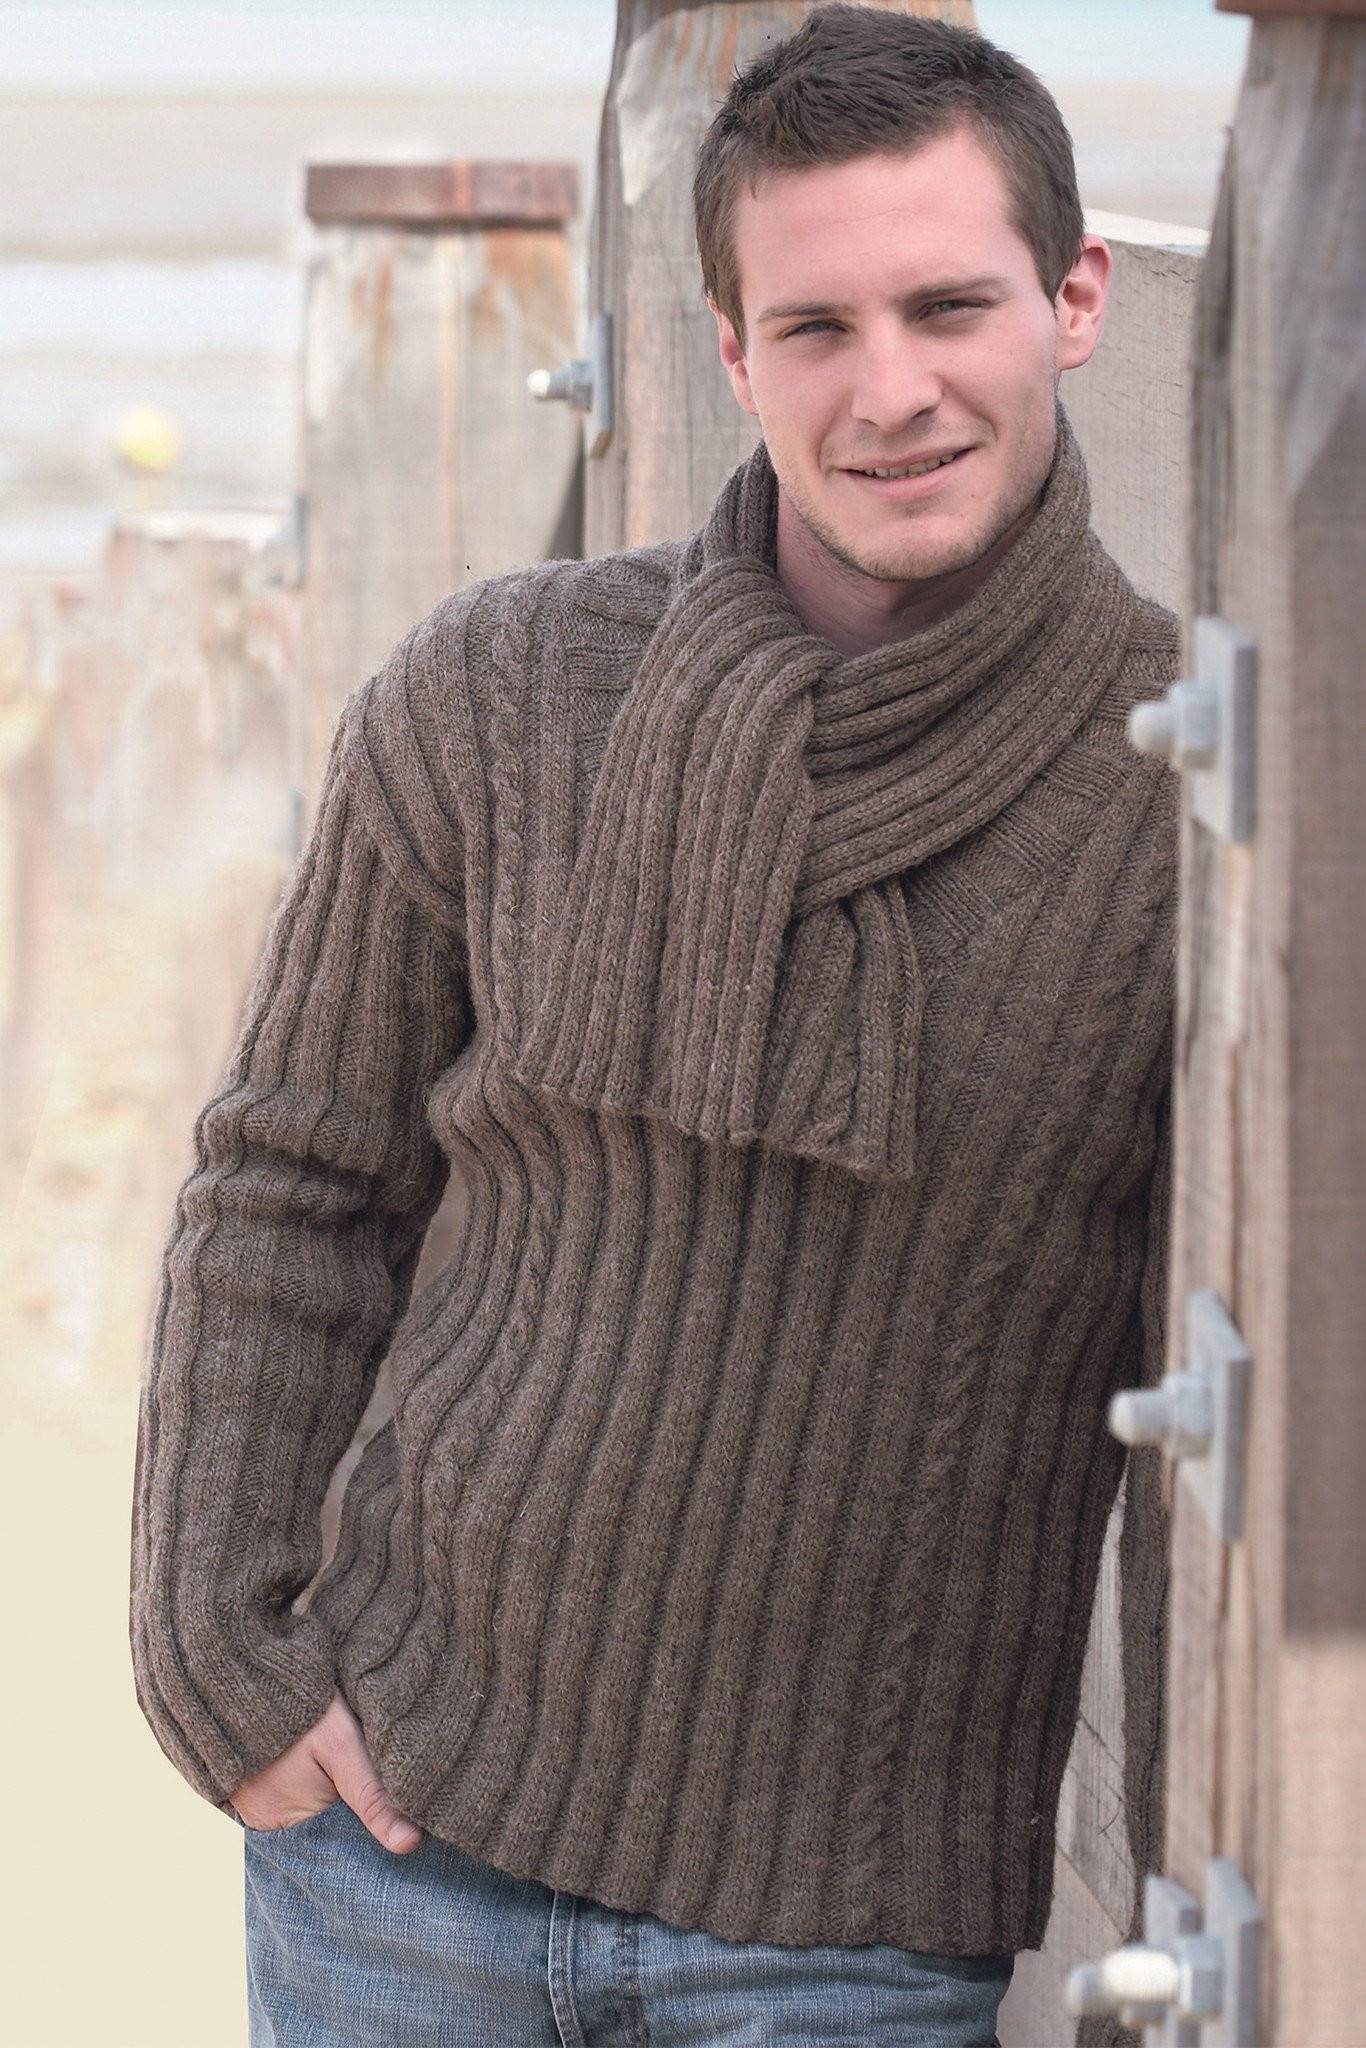 Mens Jumper and Scarf Knitting Patterns The Knitting Network